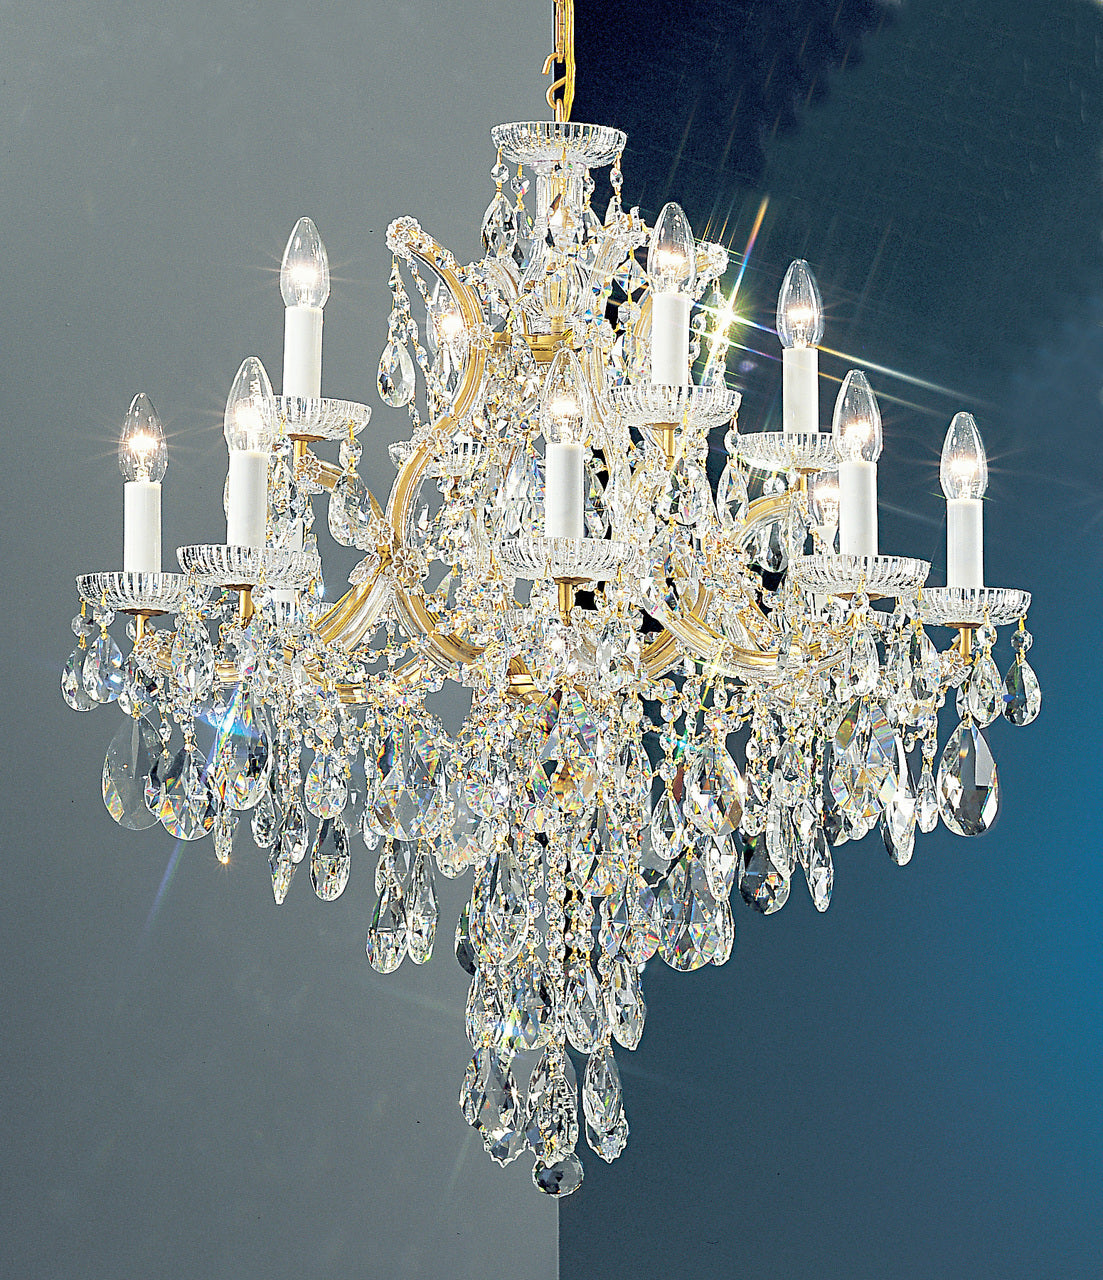 Classic Lighting 8123 OWG C Maria Theresa Traditional Crystal Chandelier in Olde World Gold (Imported from Italy)